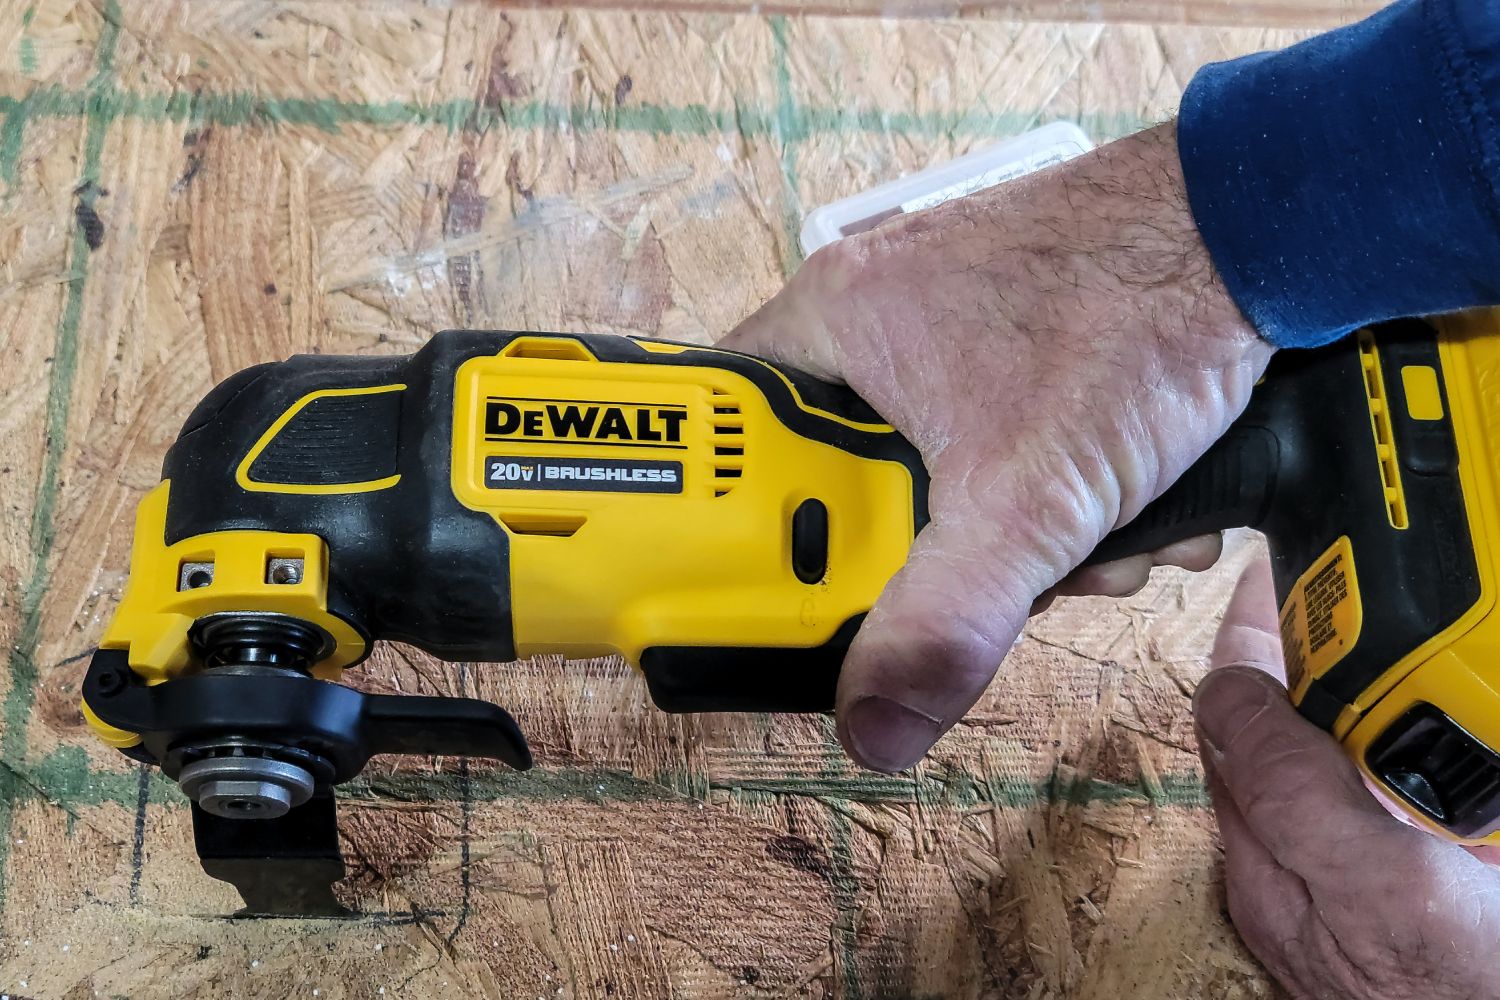 The Best Oscillating Tool Options